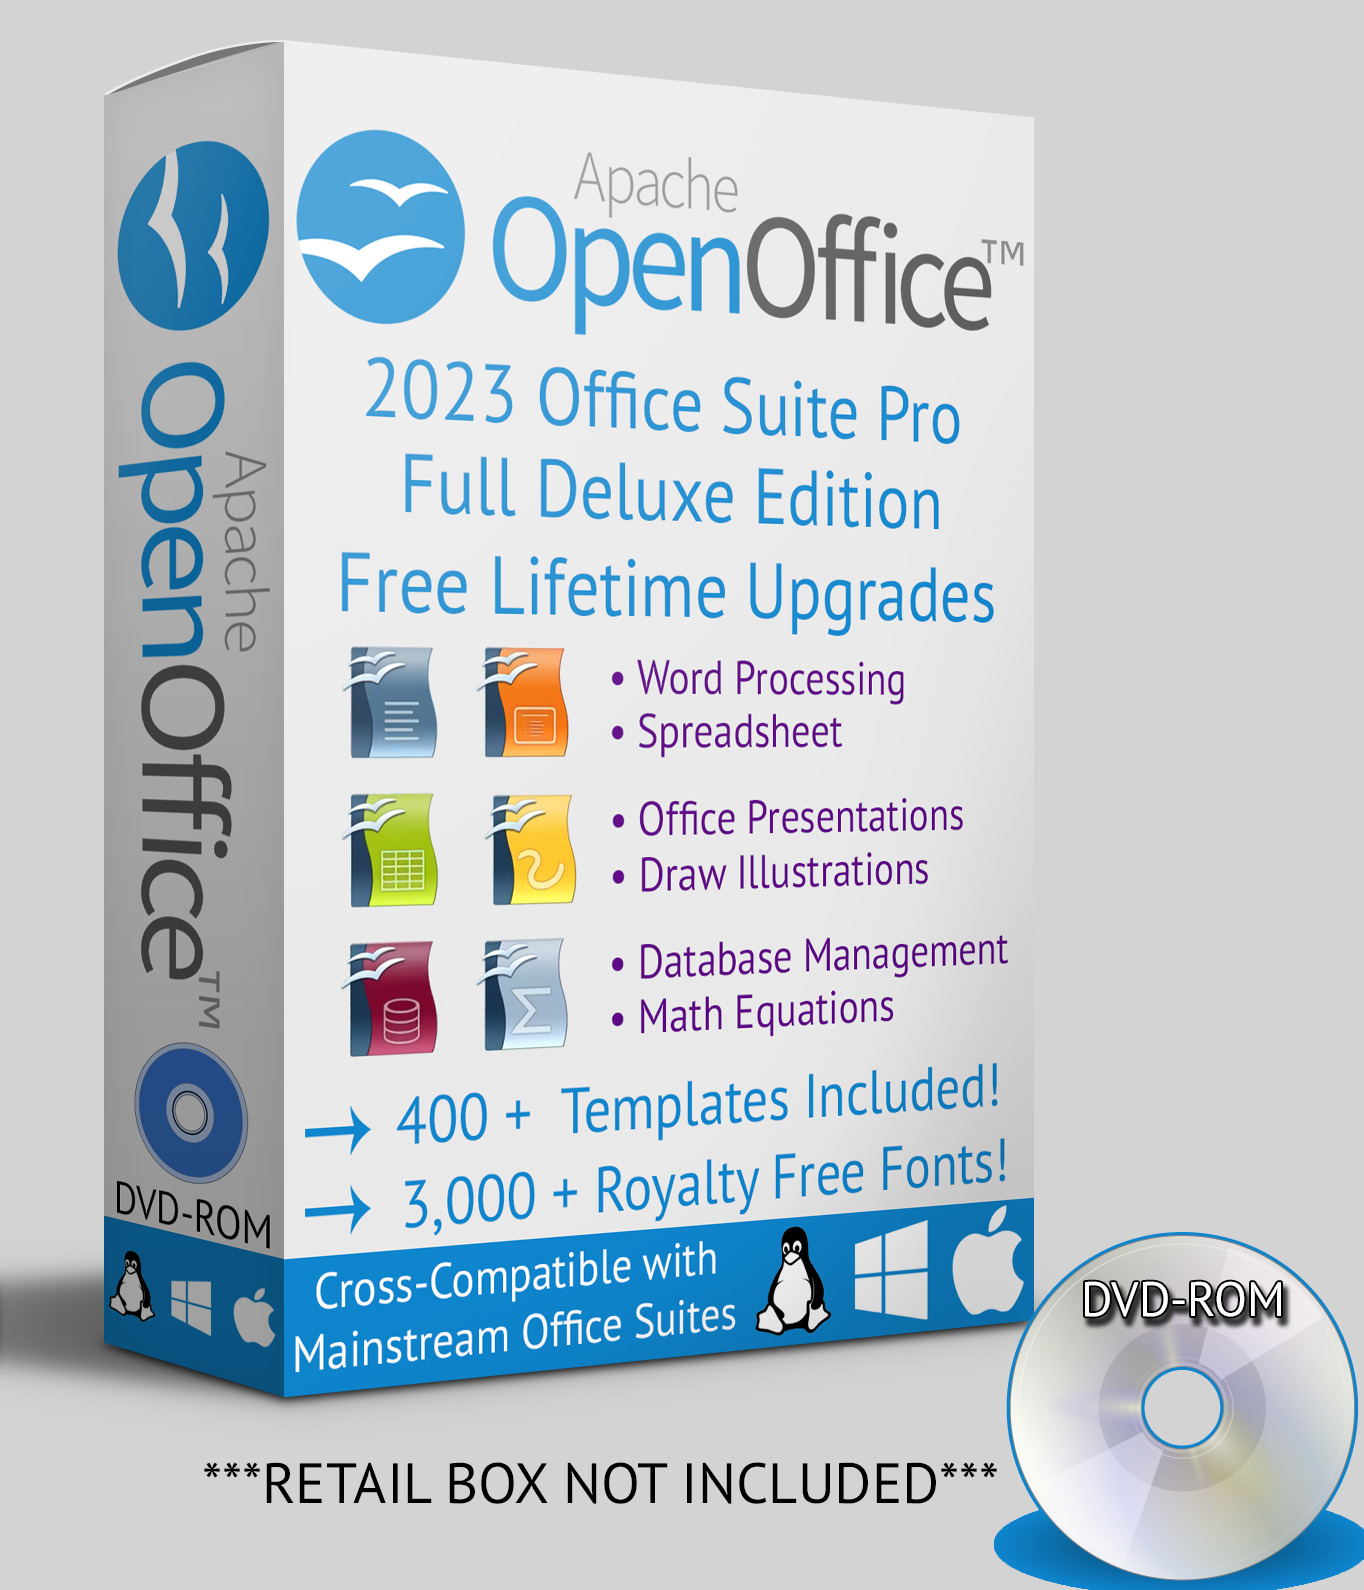 Open Office Deluxe Edition Suite 2023 4.1.15 Windows macOS Linux OpenOffice